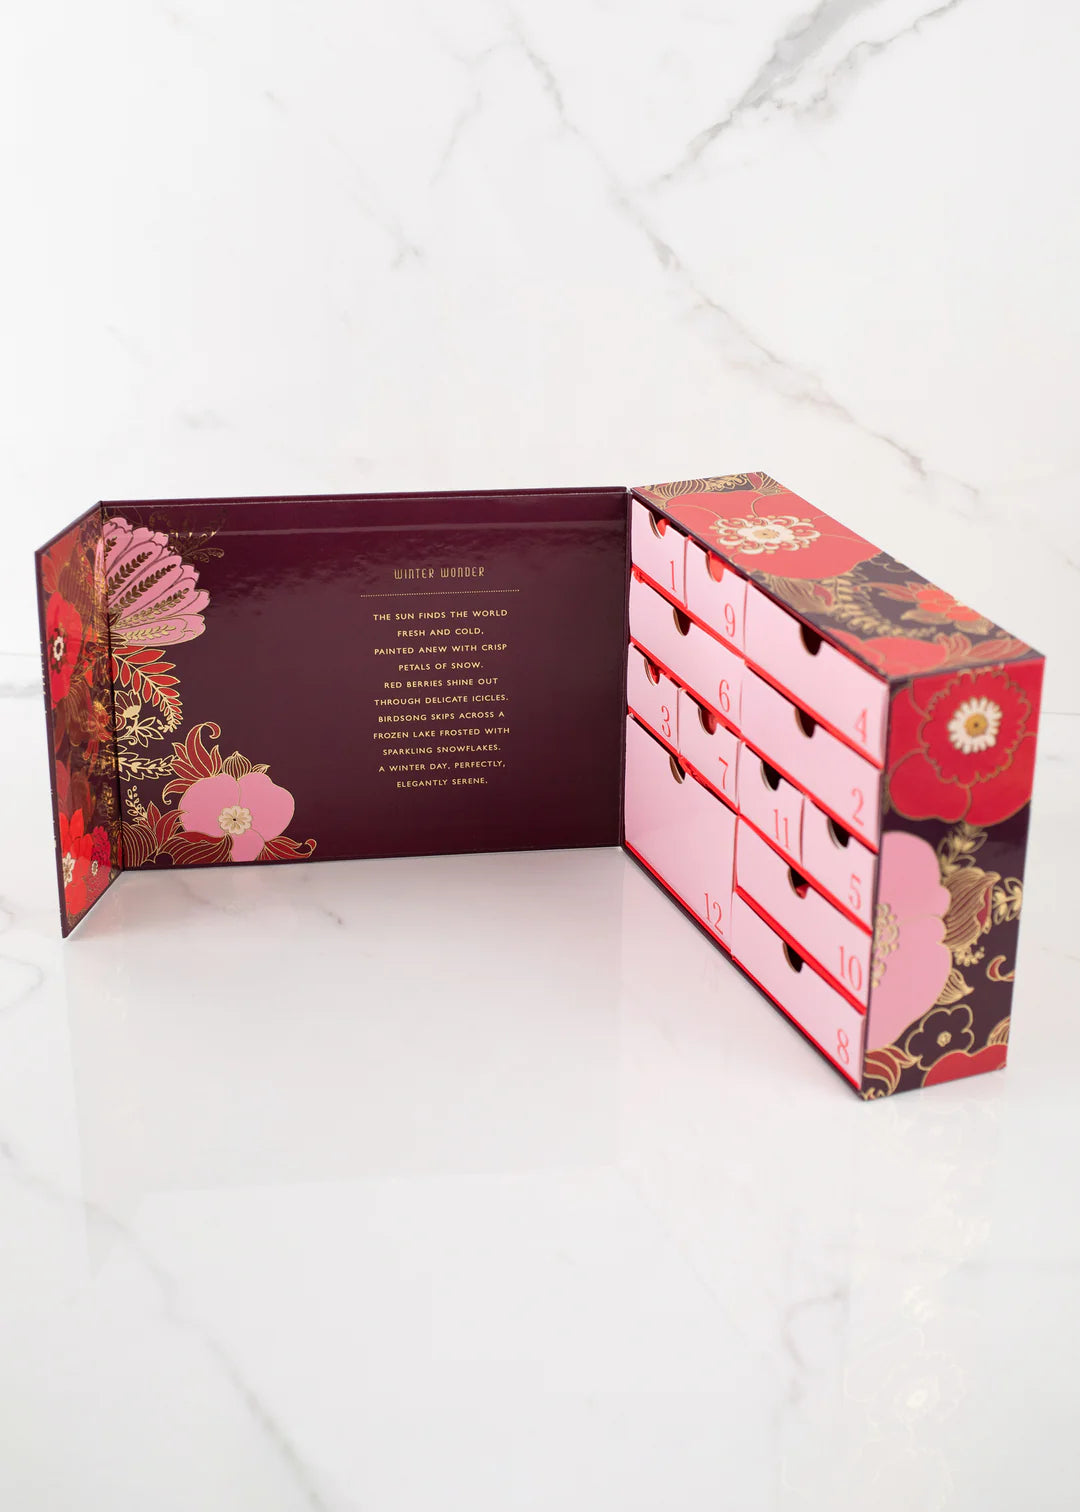 A Margot Elena Advent Calendar with floral and ornate designs, containing twelve small drawers numbered 1 through 12. The box is open, revealing a message inside the lid. The background is a white marble surface.